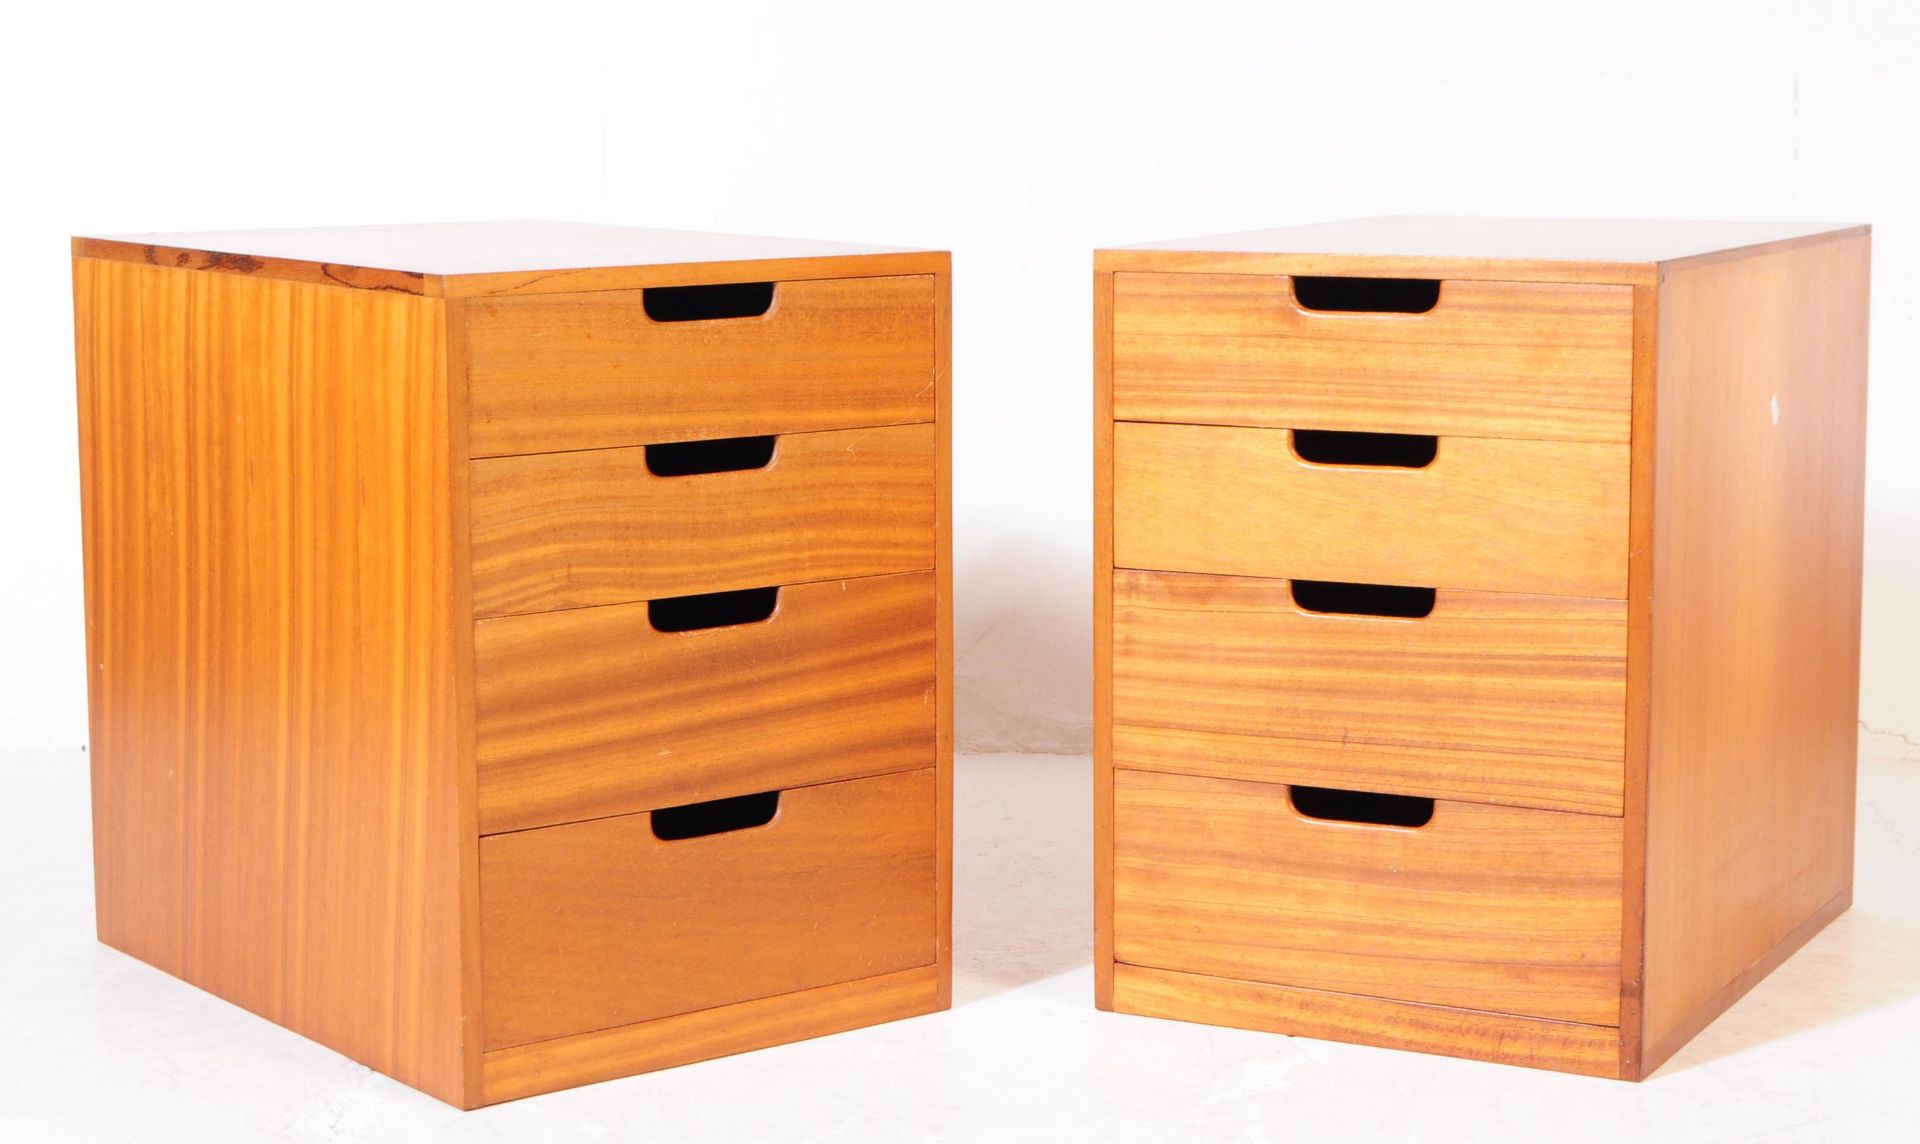 BRITISH MODERN DESIGN - PAIR OF BEDSIDE CHEST OF DRAWERS